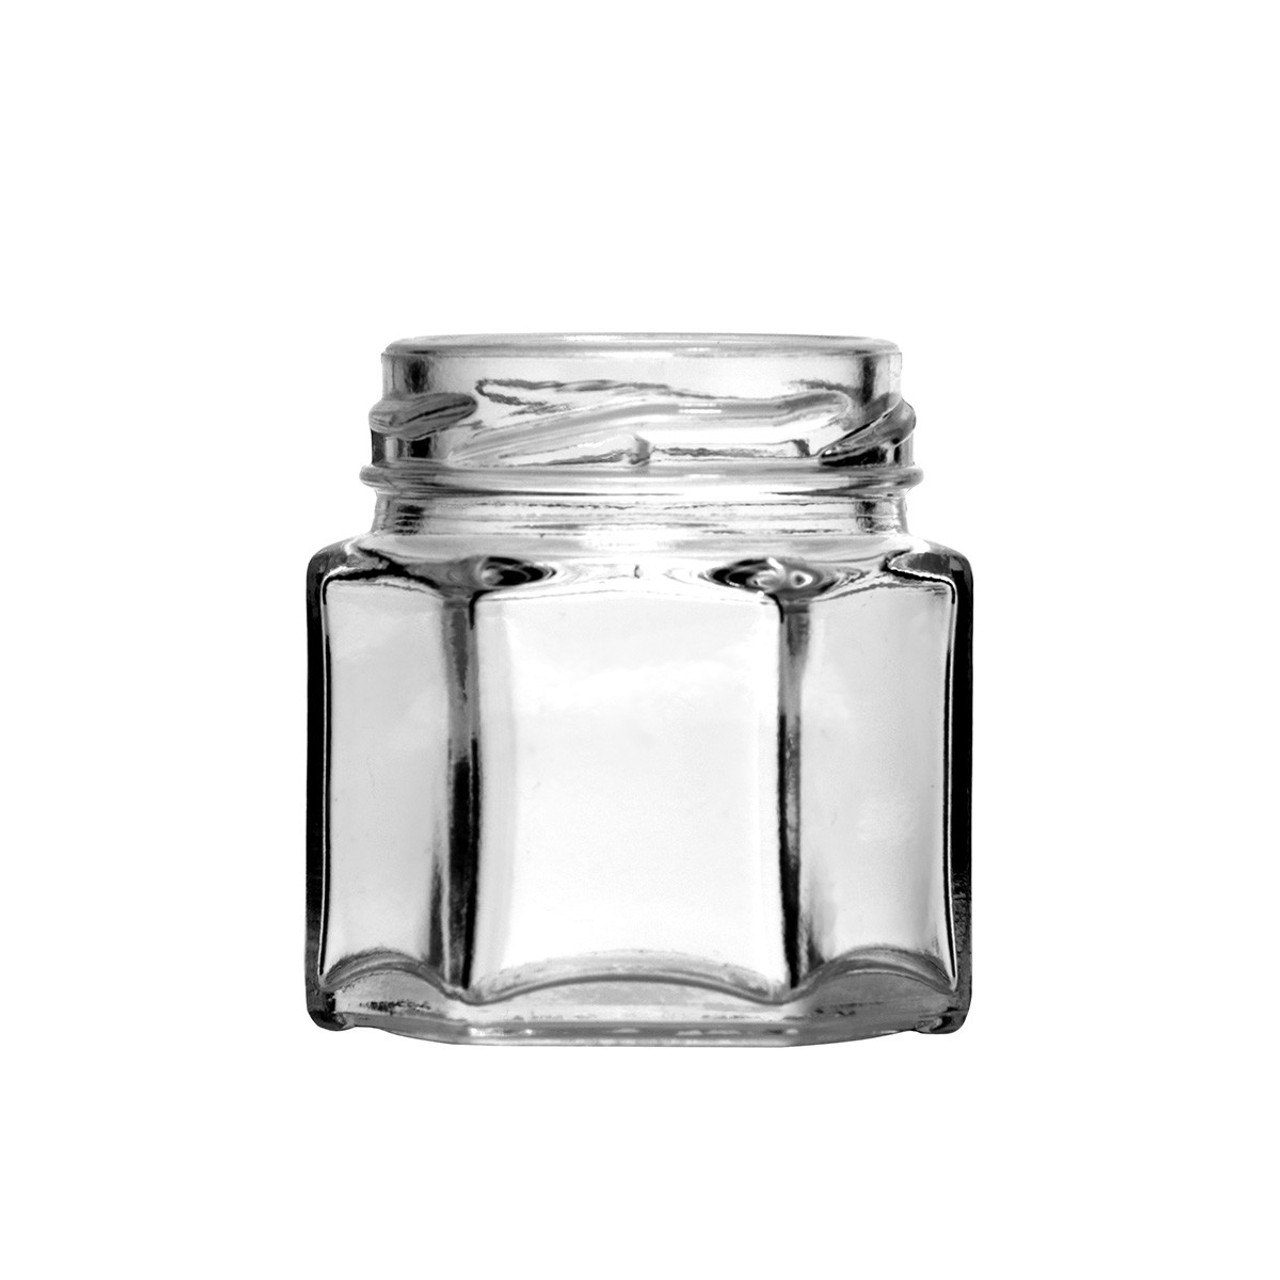 Hexagon Candle Making & Soap Making Jars & Containers for sale